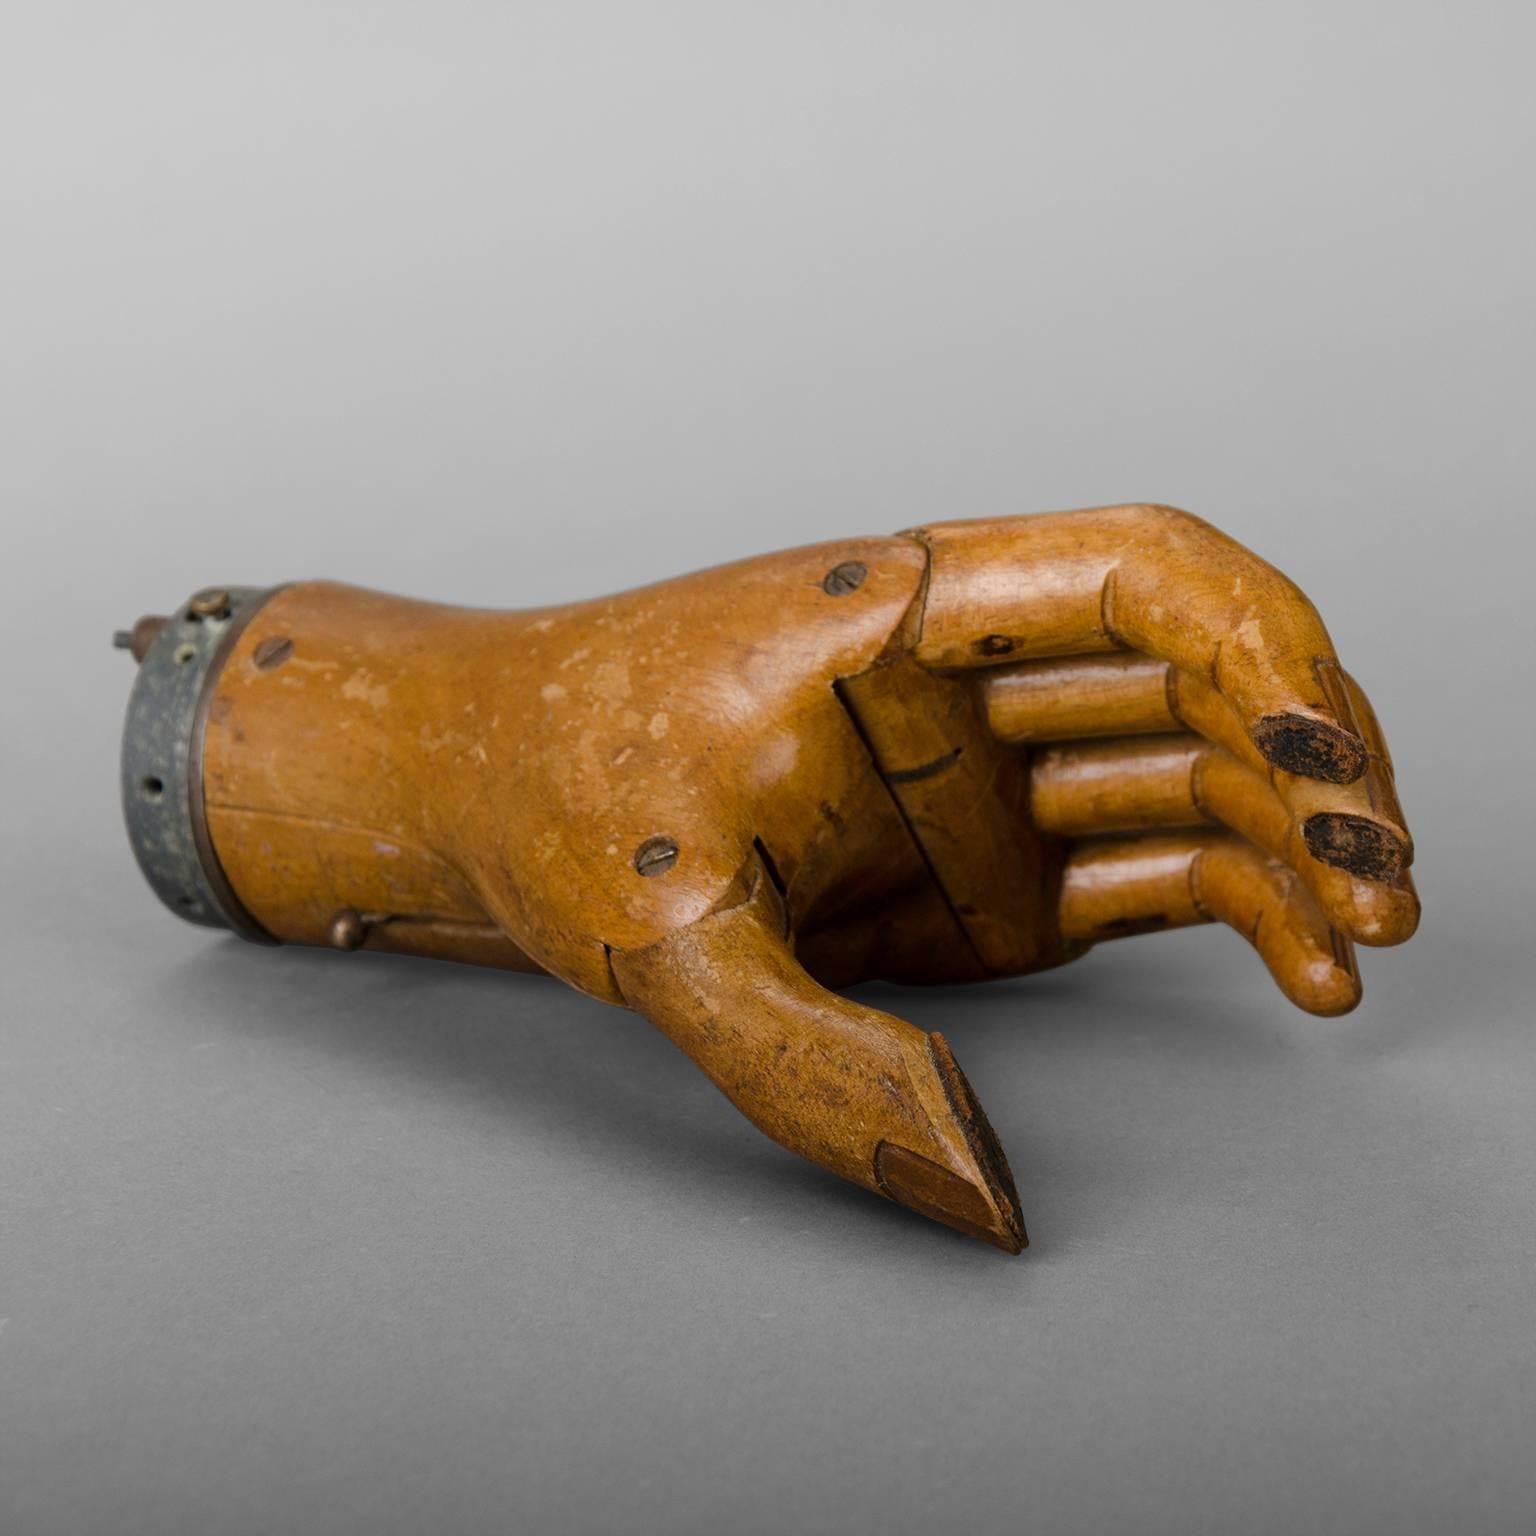 Steel Hand Prosthesis with Mechanical Joint, circa1920